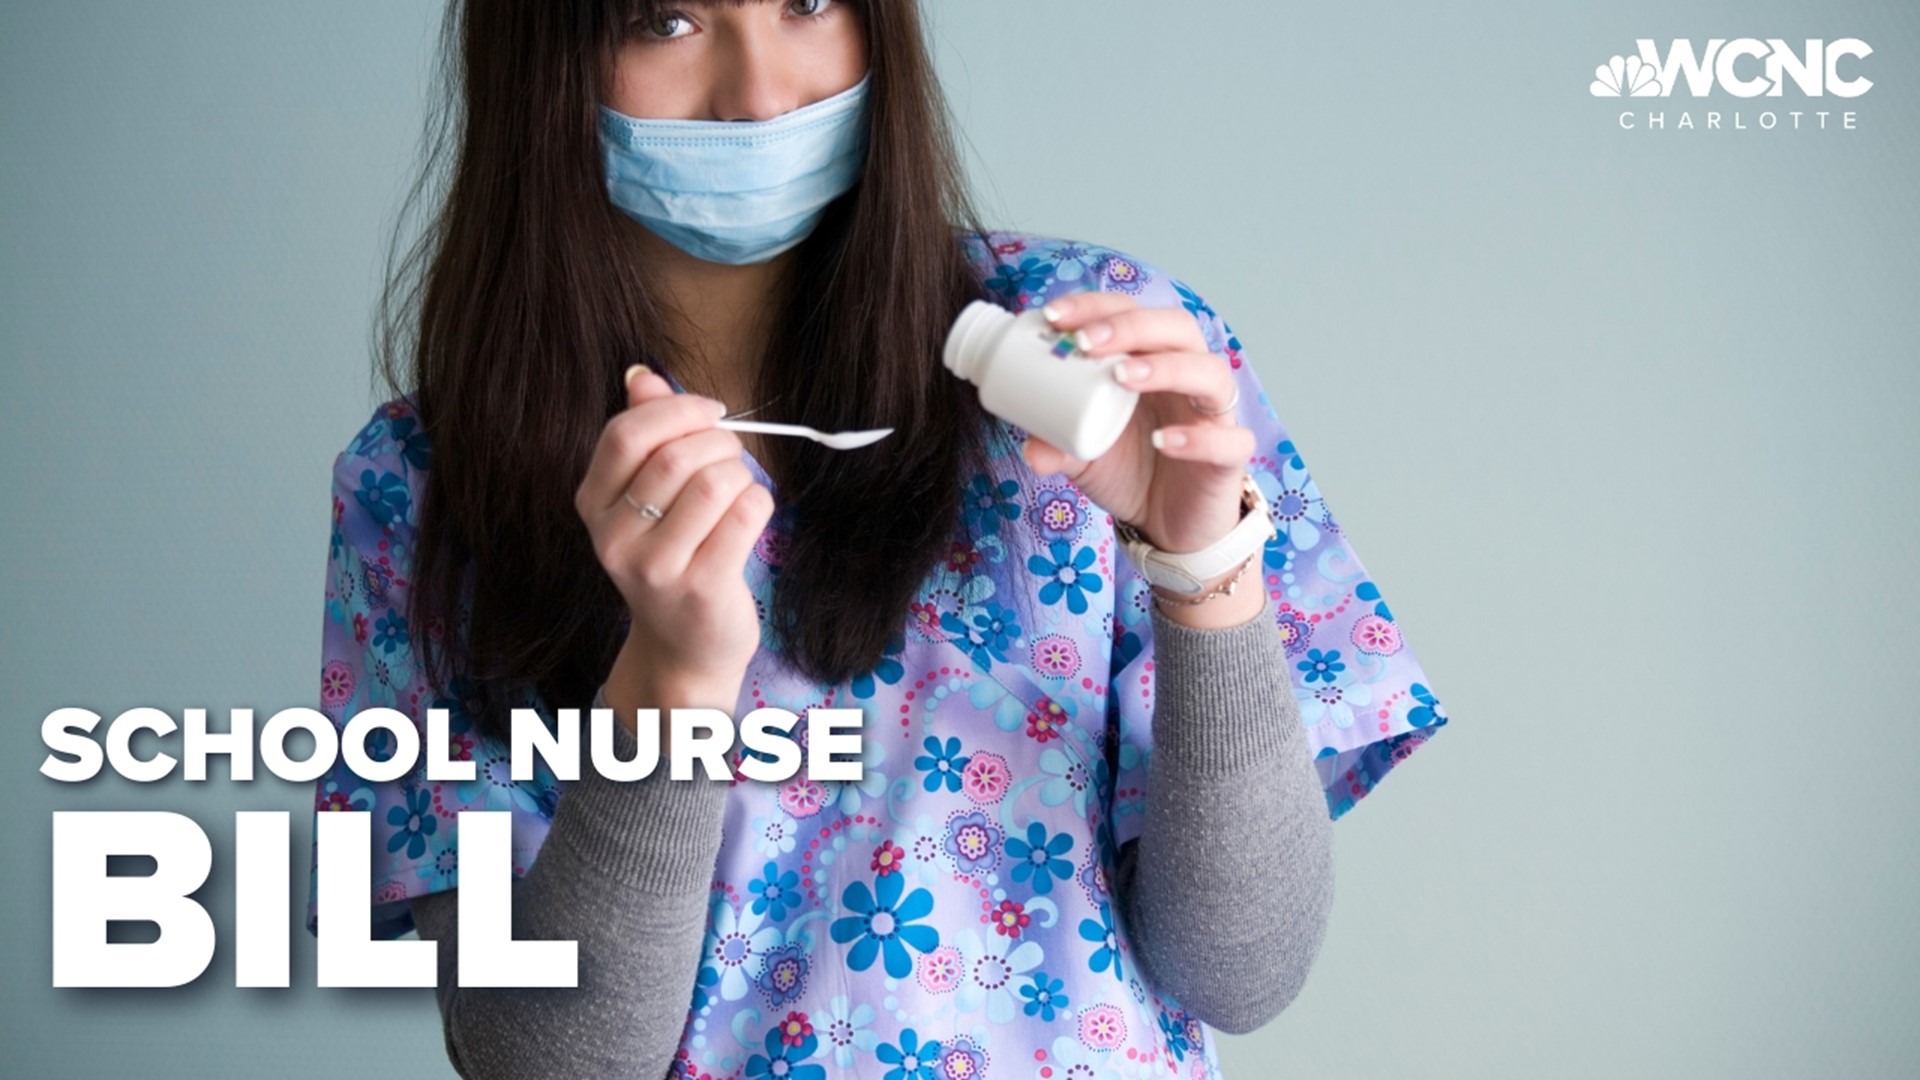 Senate Bill 263 would require every school in the state to have at least one nurse.